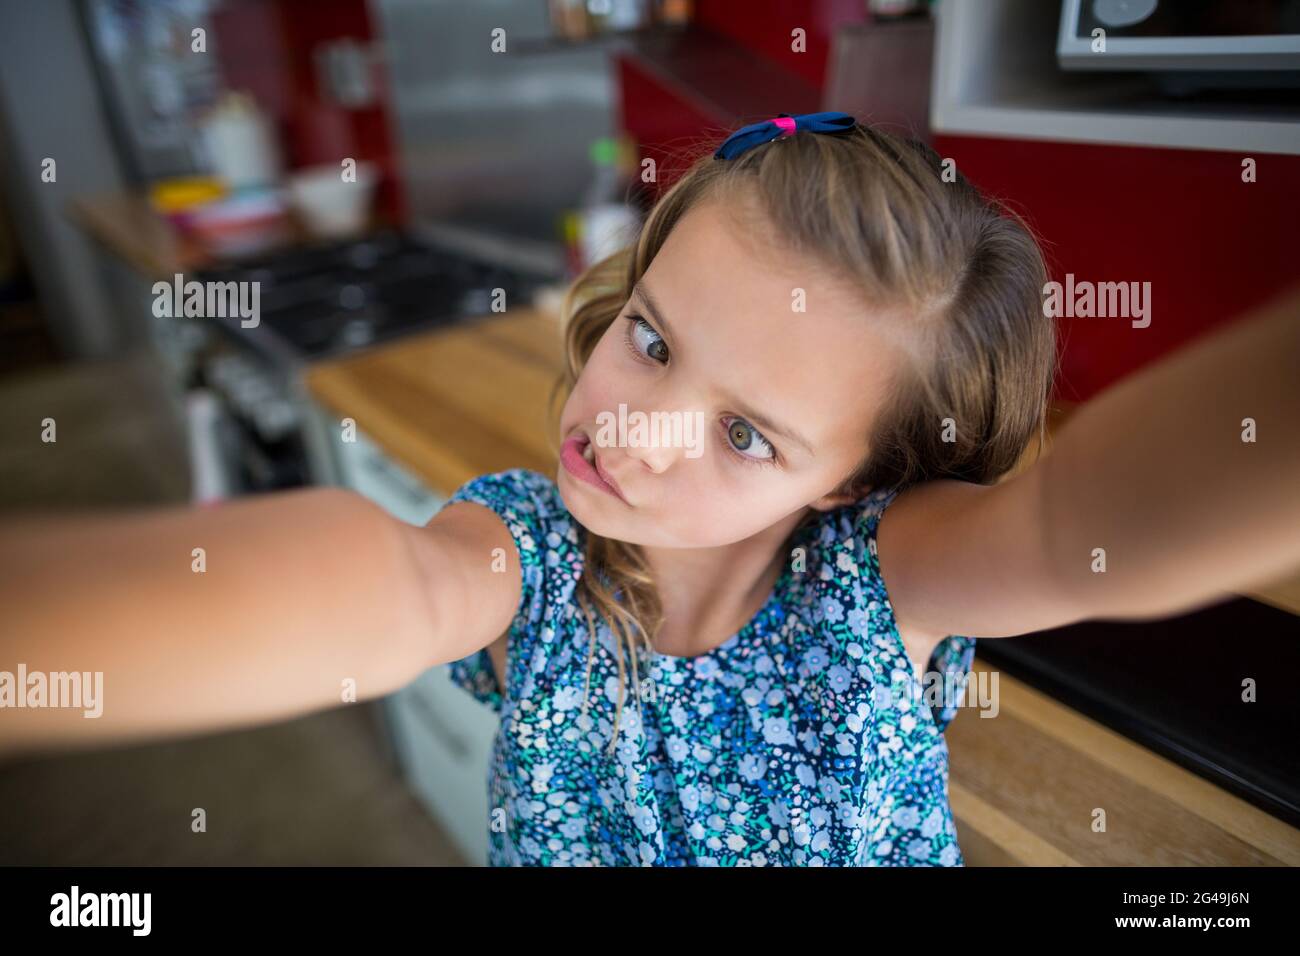 Girl pulling funny faces in kitchen Stock Photo